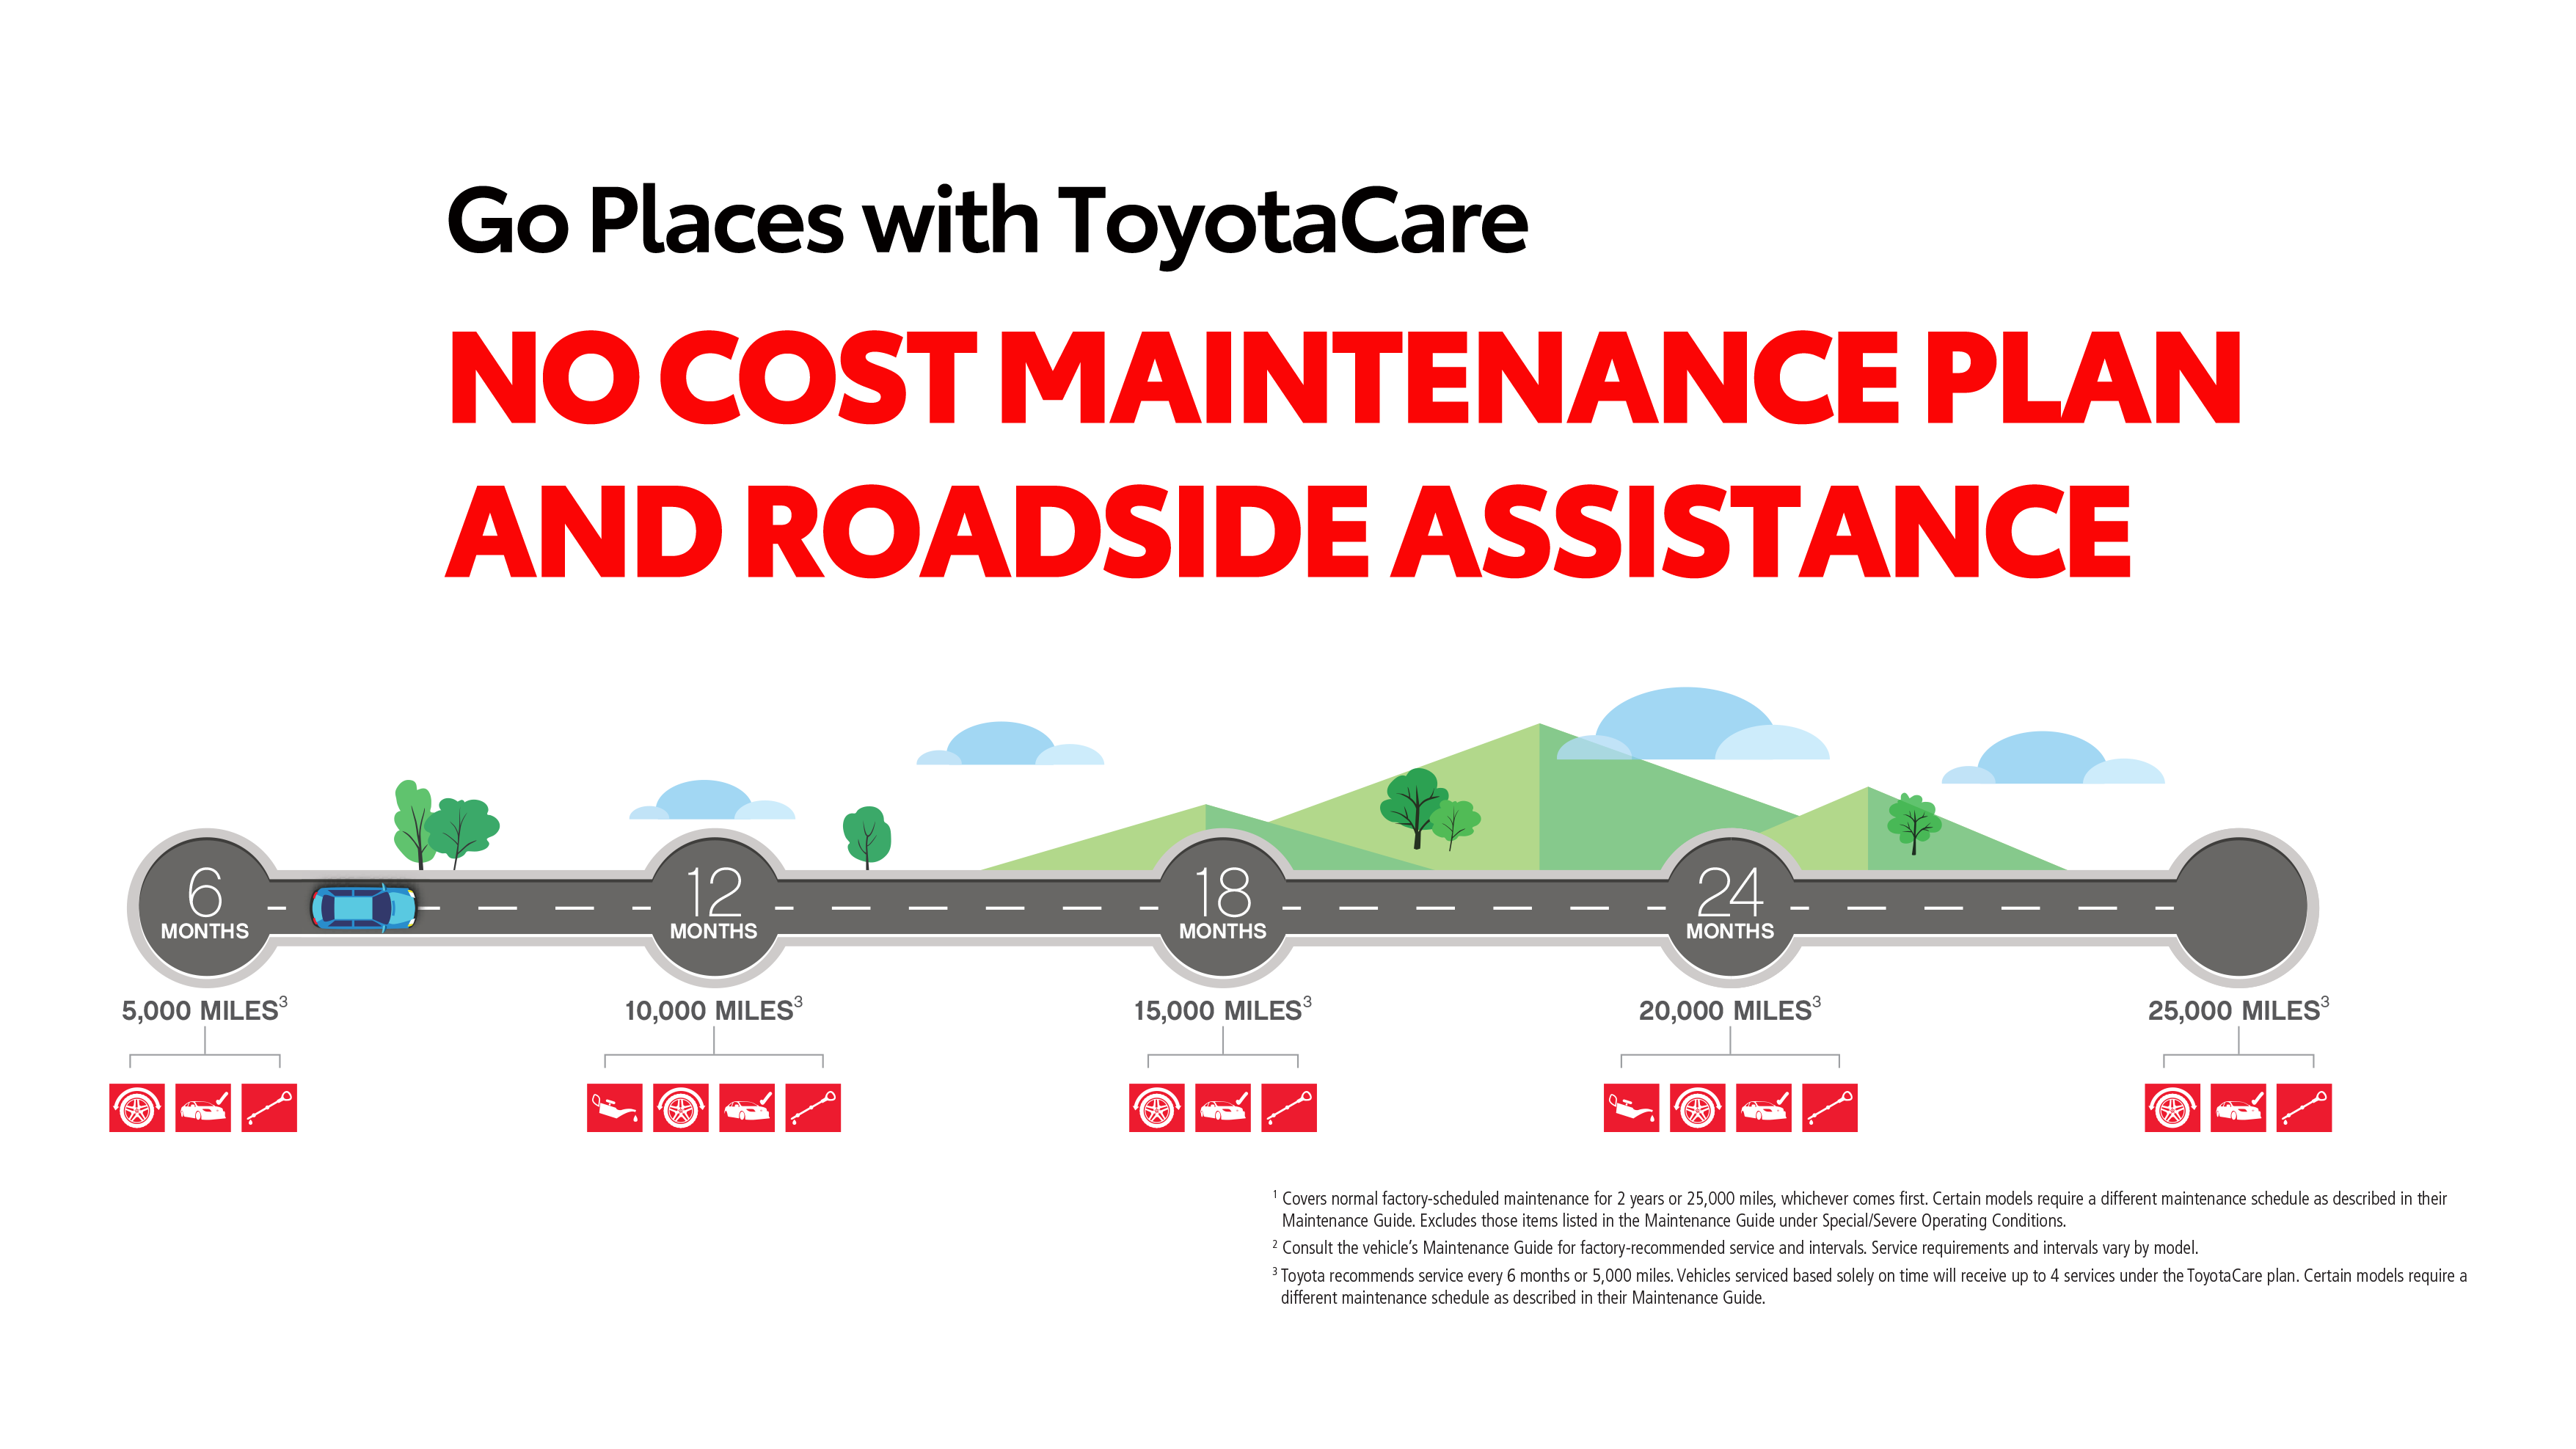 Toyota no cost maintenance plan and roadside assistance